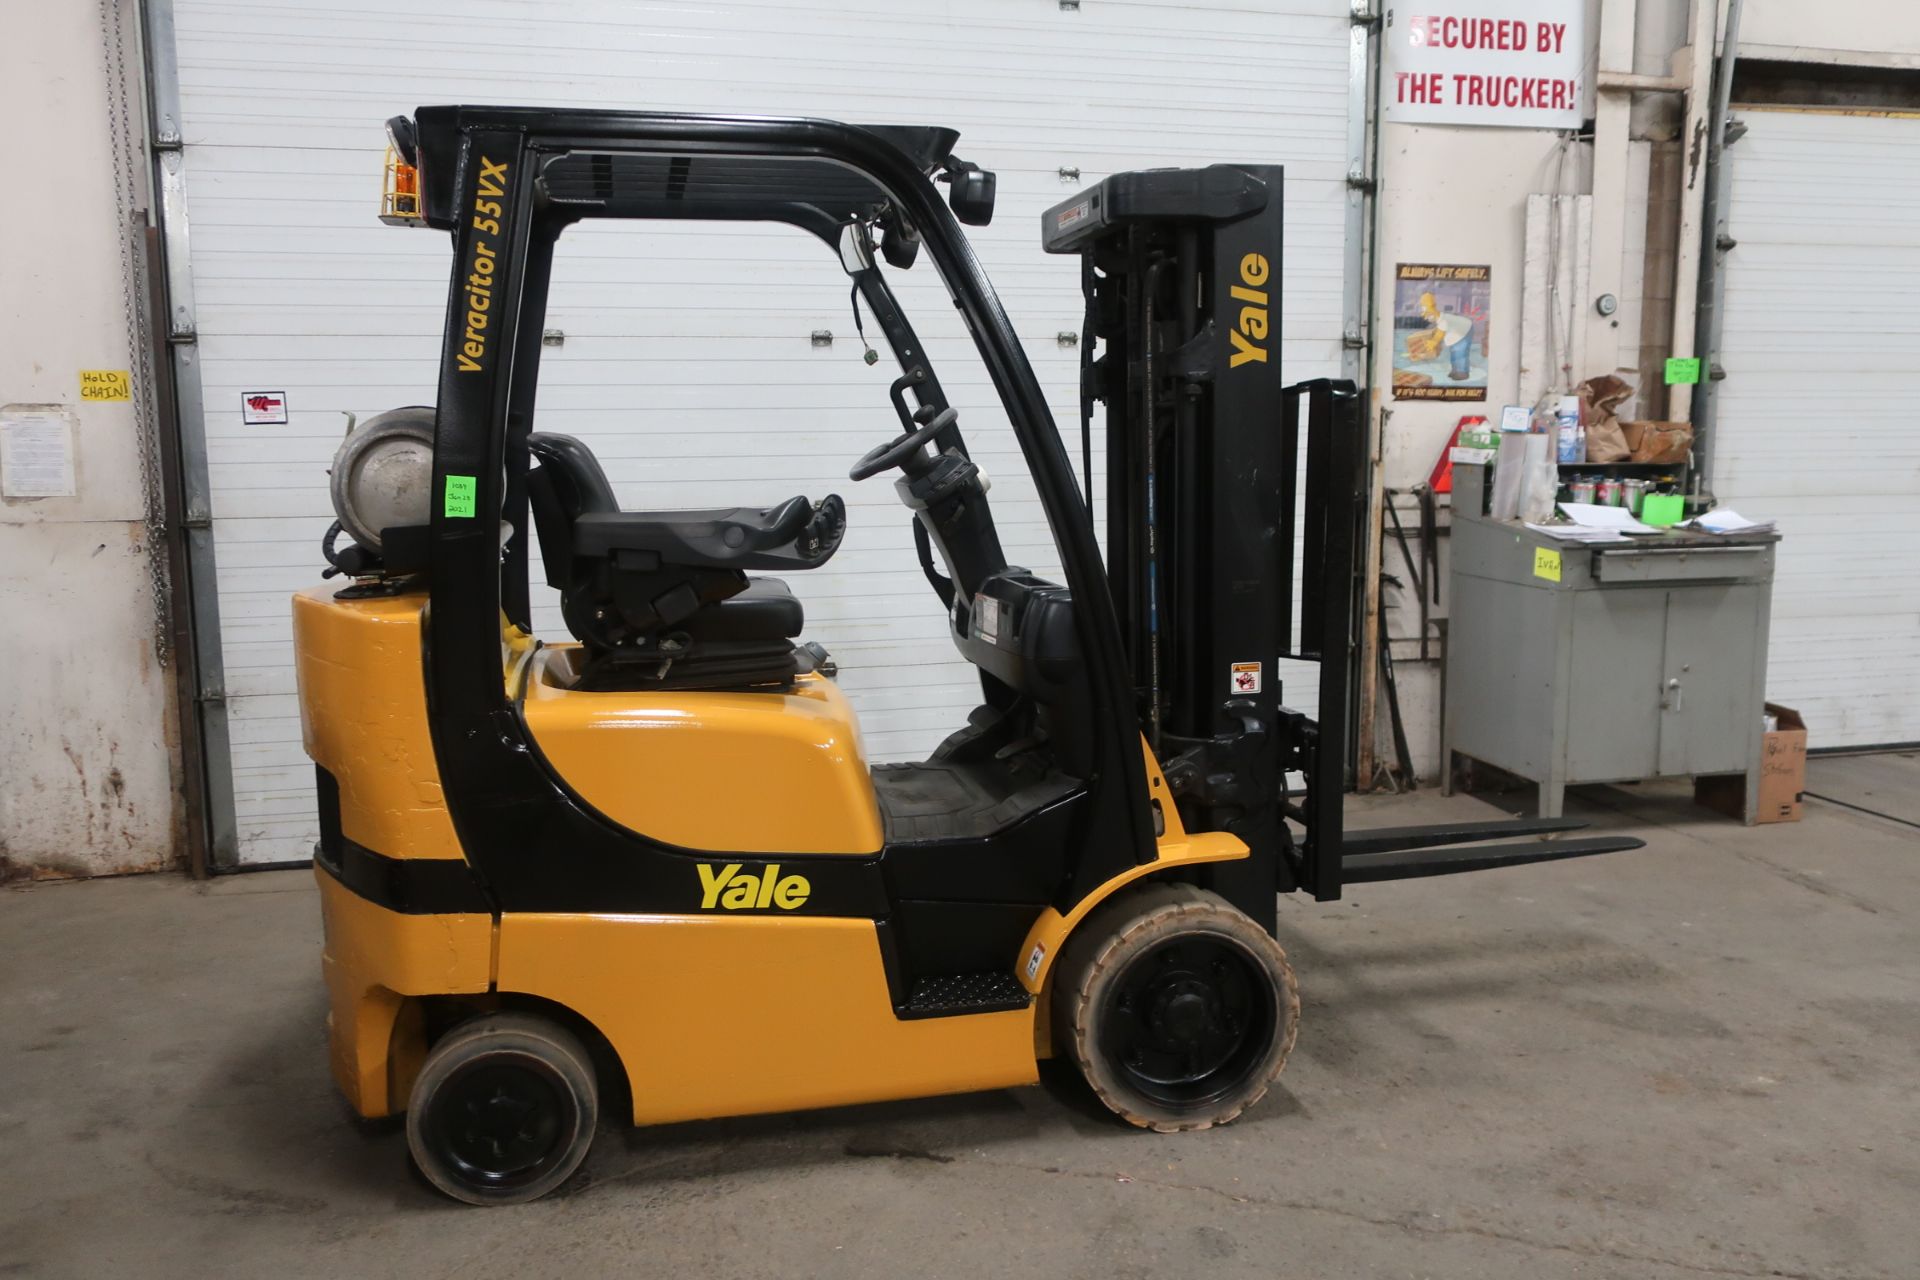 FREE CUSTOMS - 2015 Yale 5500lbs Capacity Forklift LPG (propane) with 3-stage mast with sideshift (